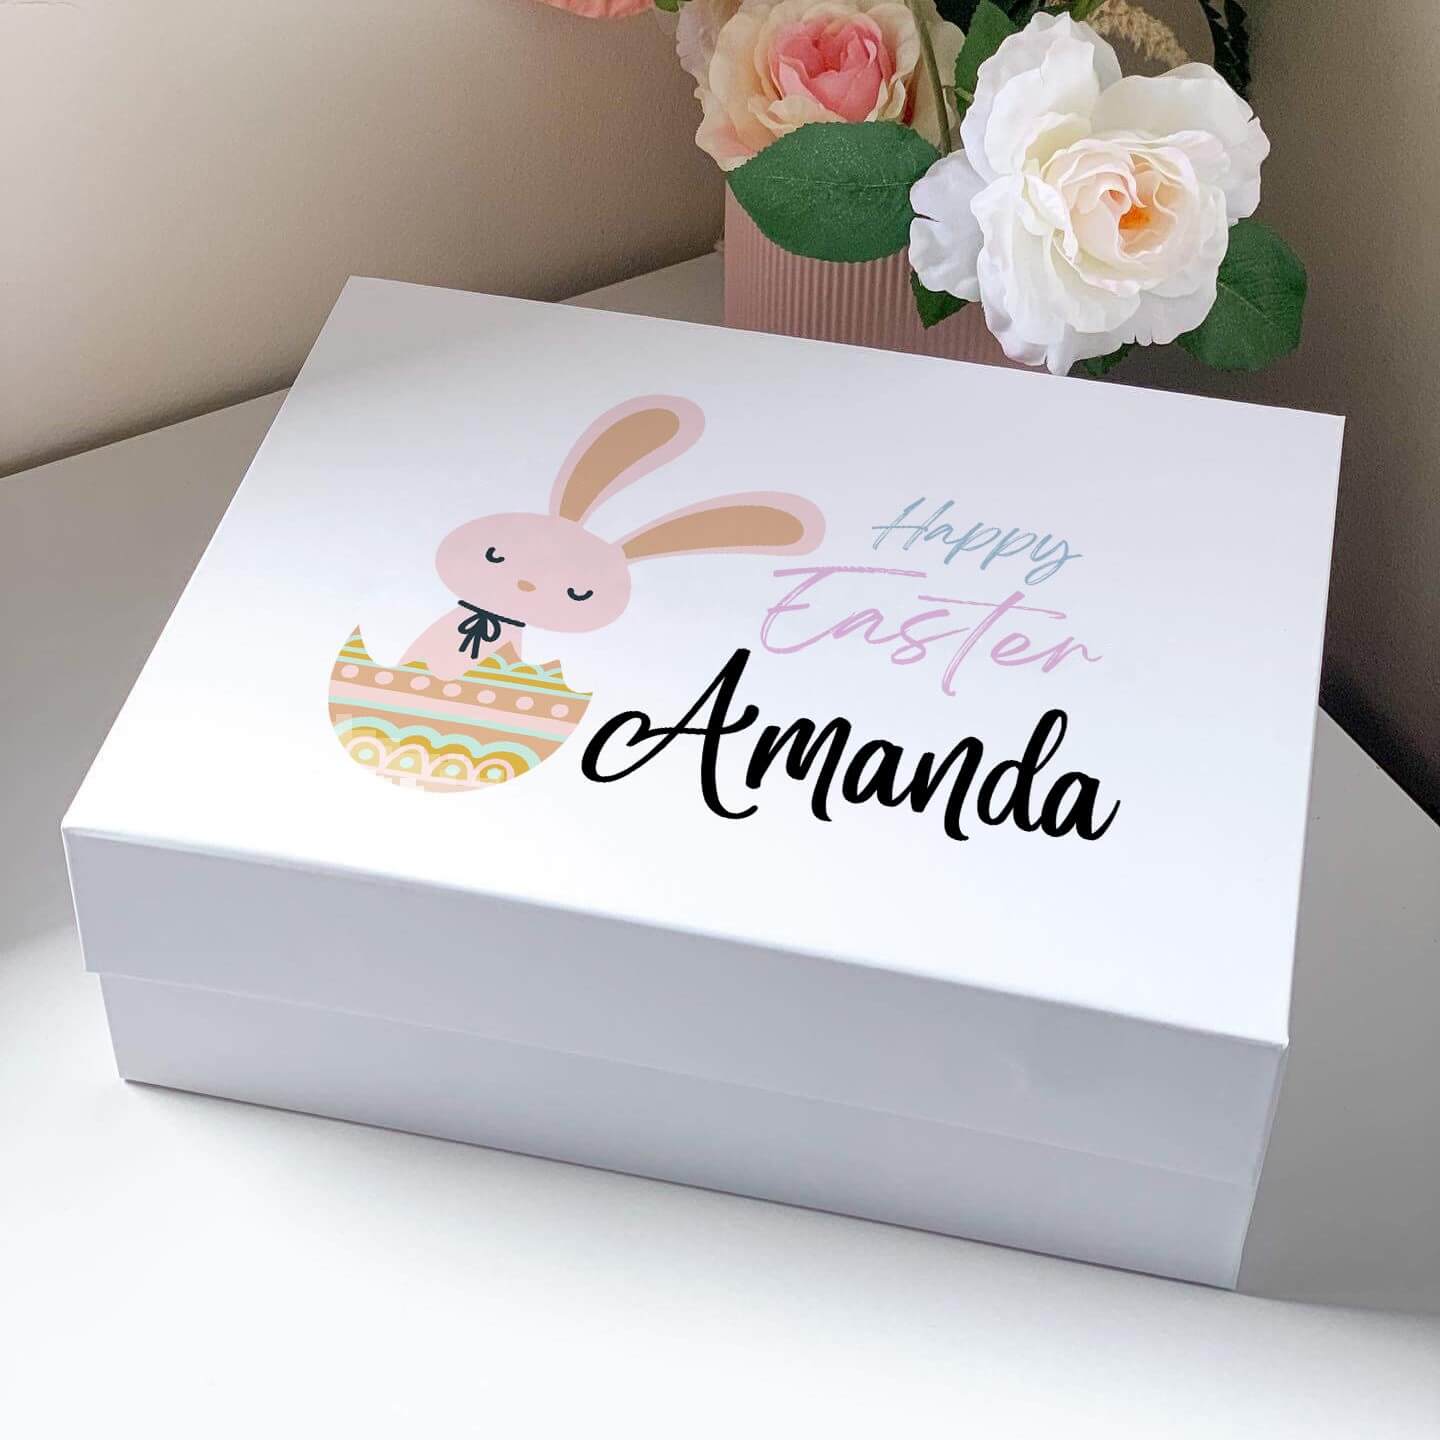 Happy Easter Bunny Magnetic Closure Gift Box #5